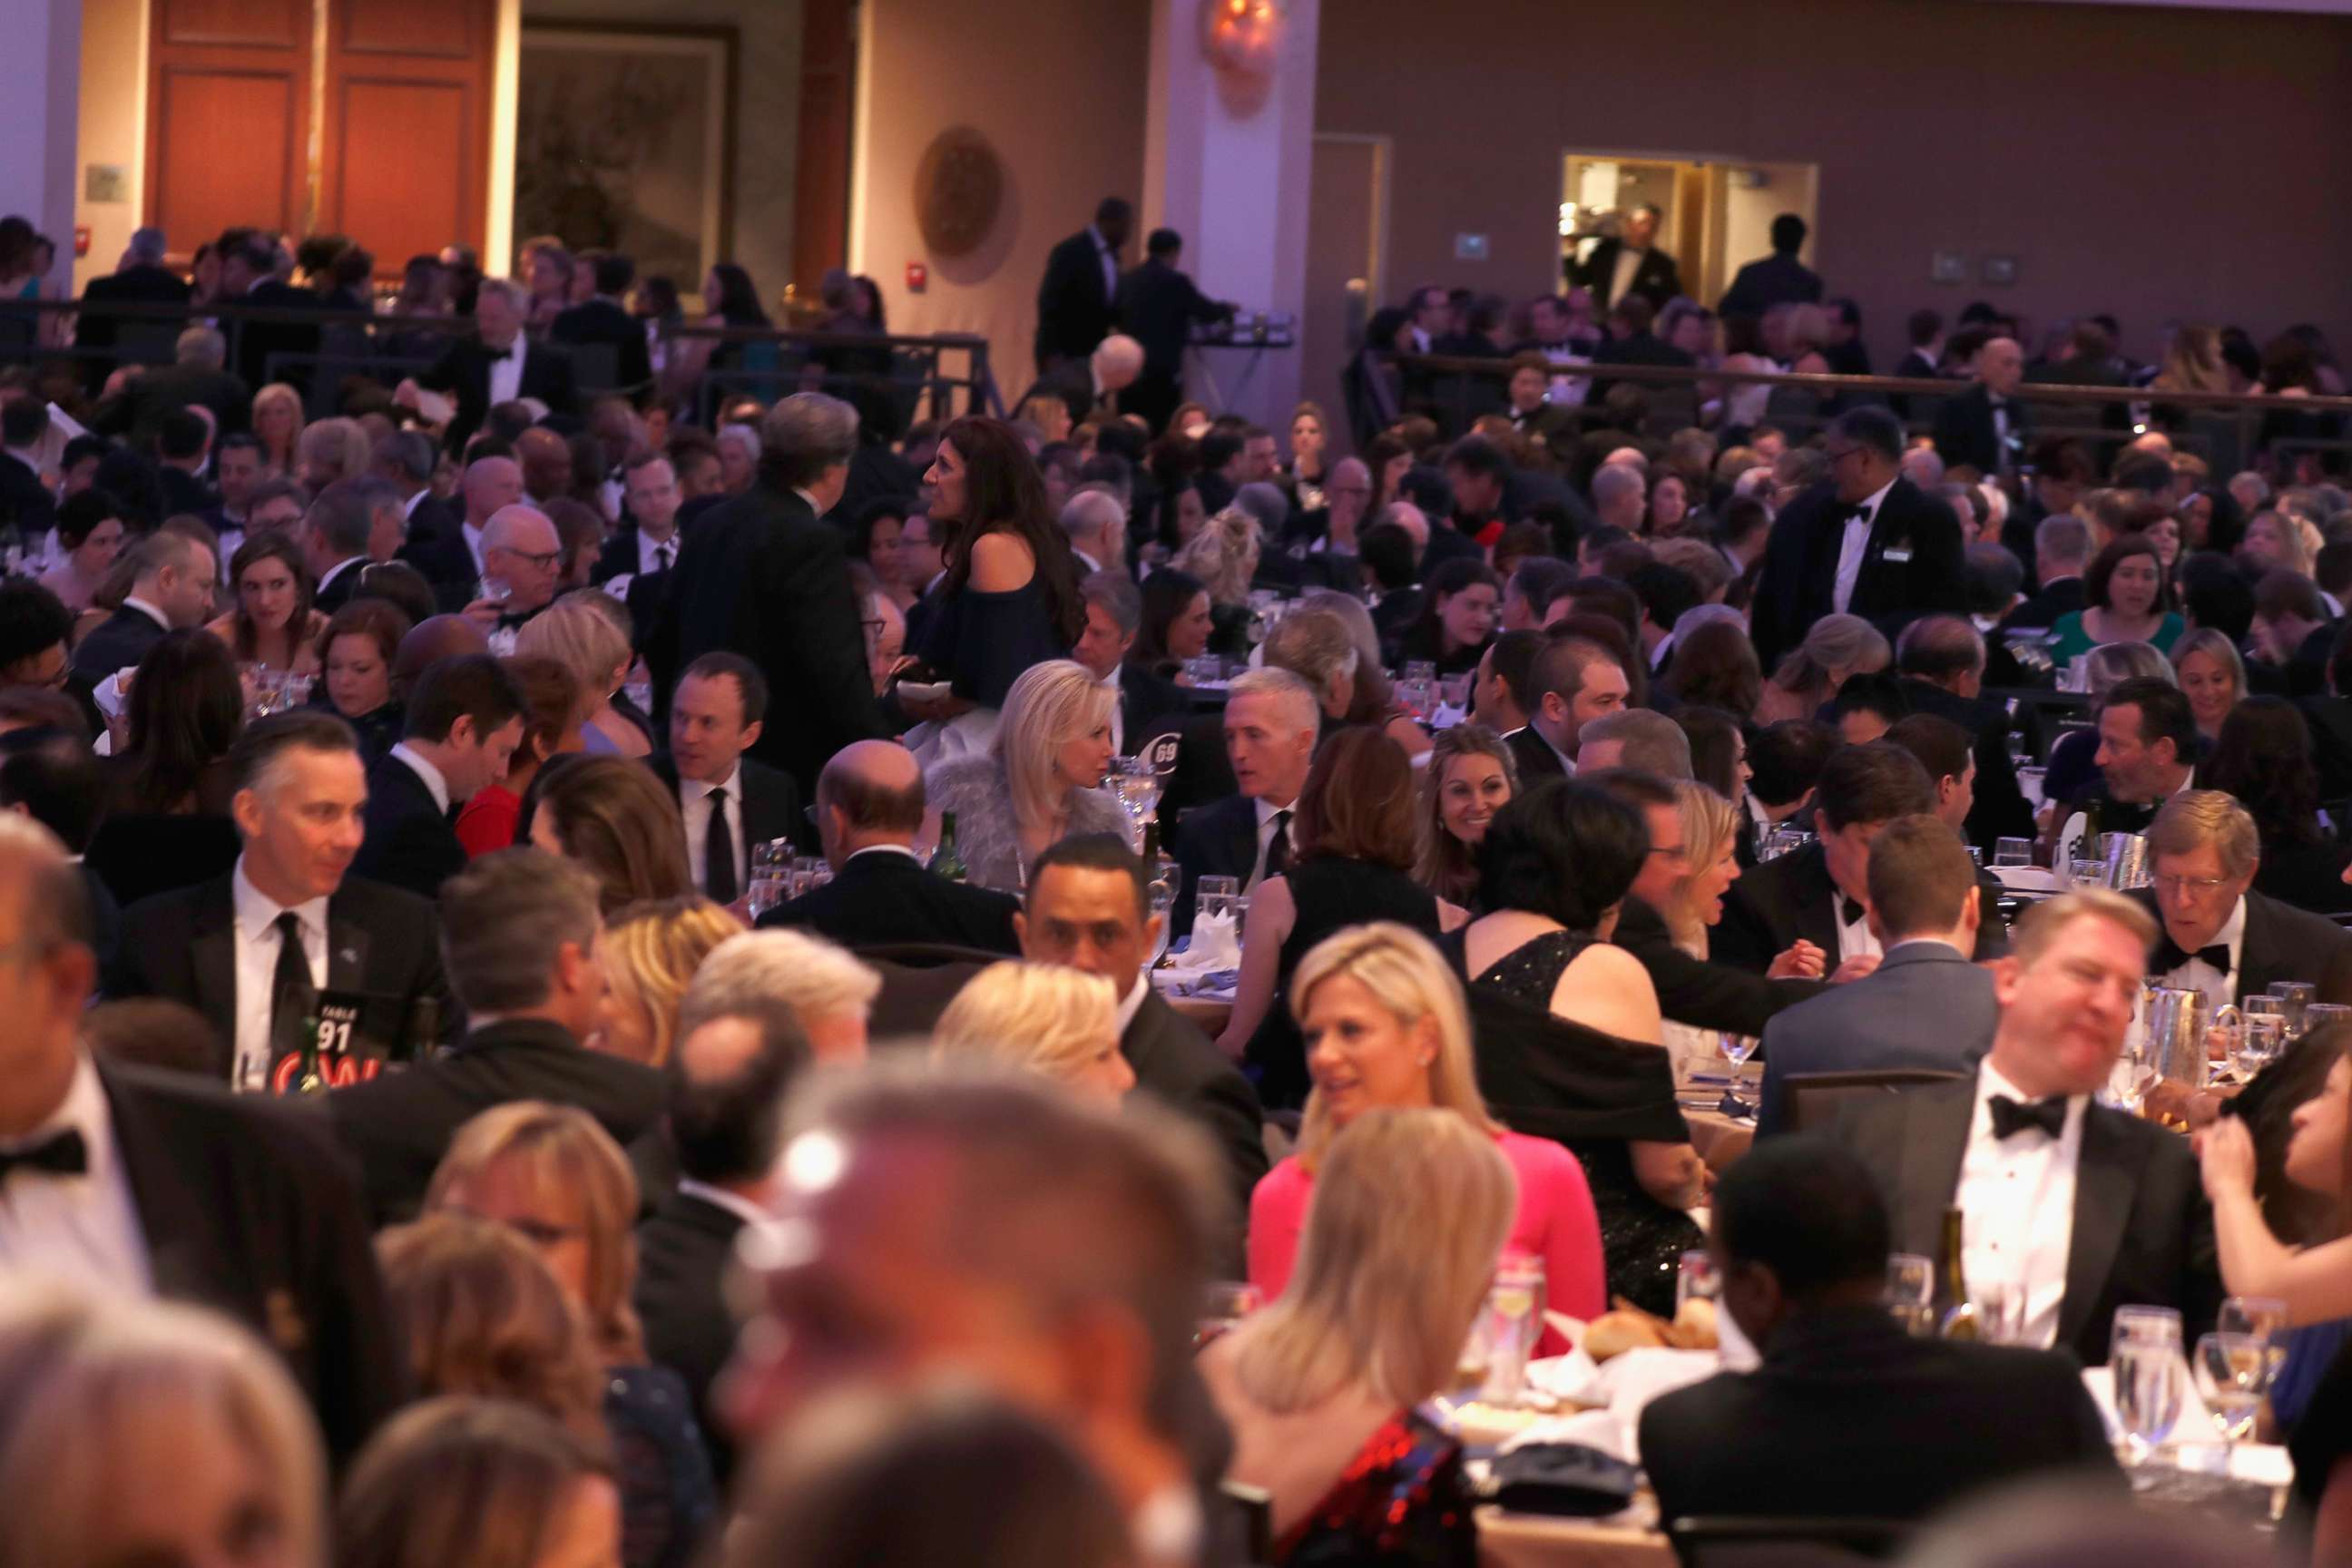 PHOTO: In this April 28, 2018, file photo, the audience is shown at the 2018 White House Correspondents' Dinner at the Washington Hilton in Washington, D.C. 